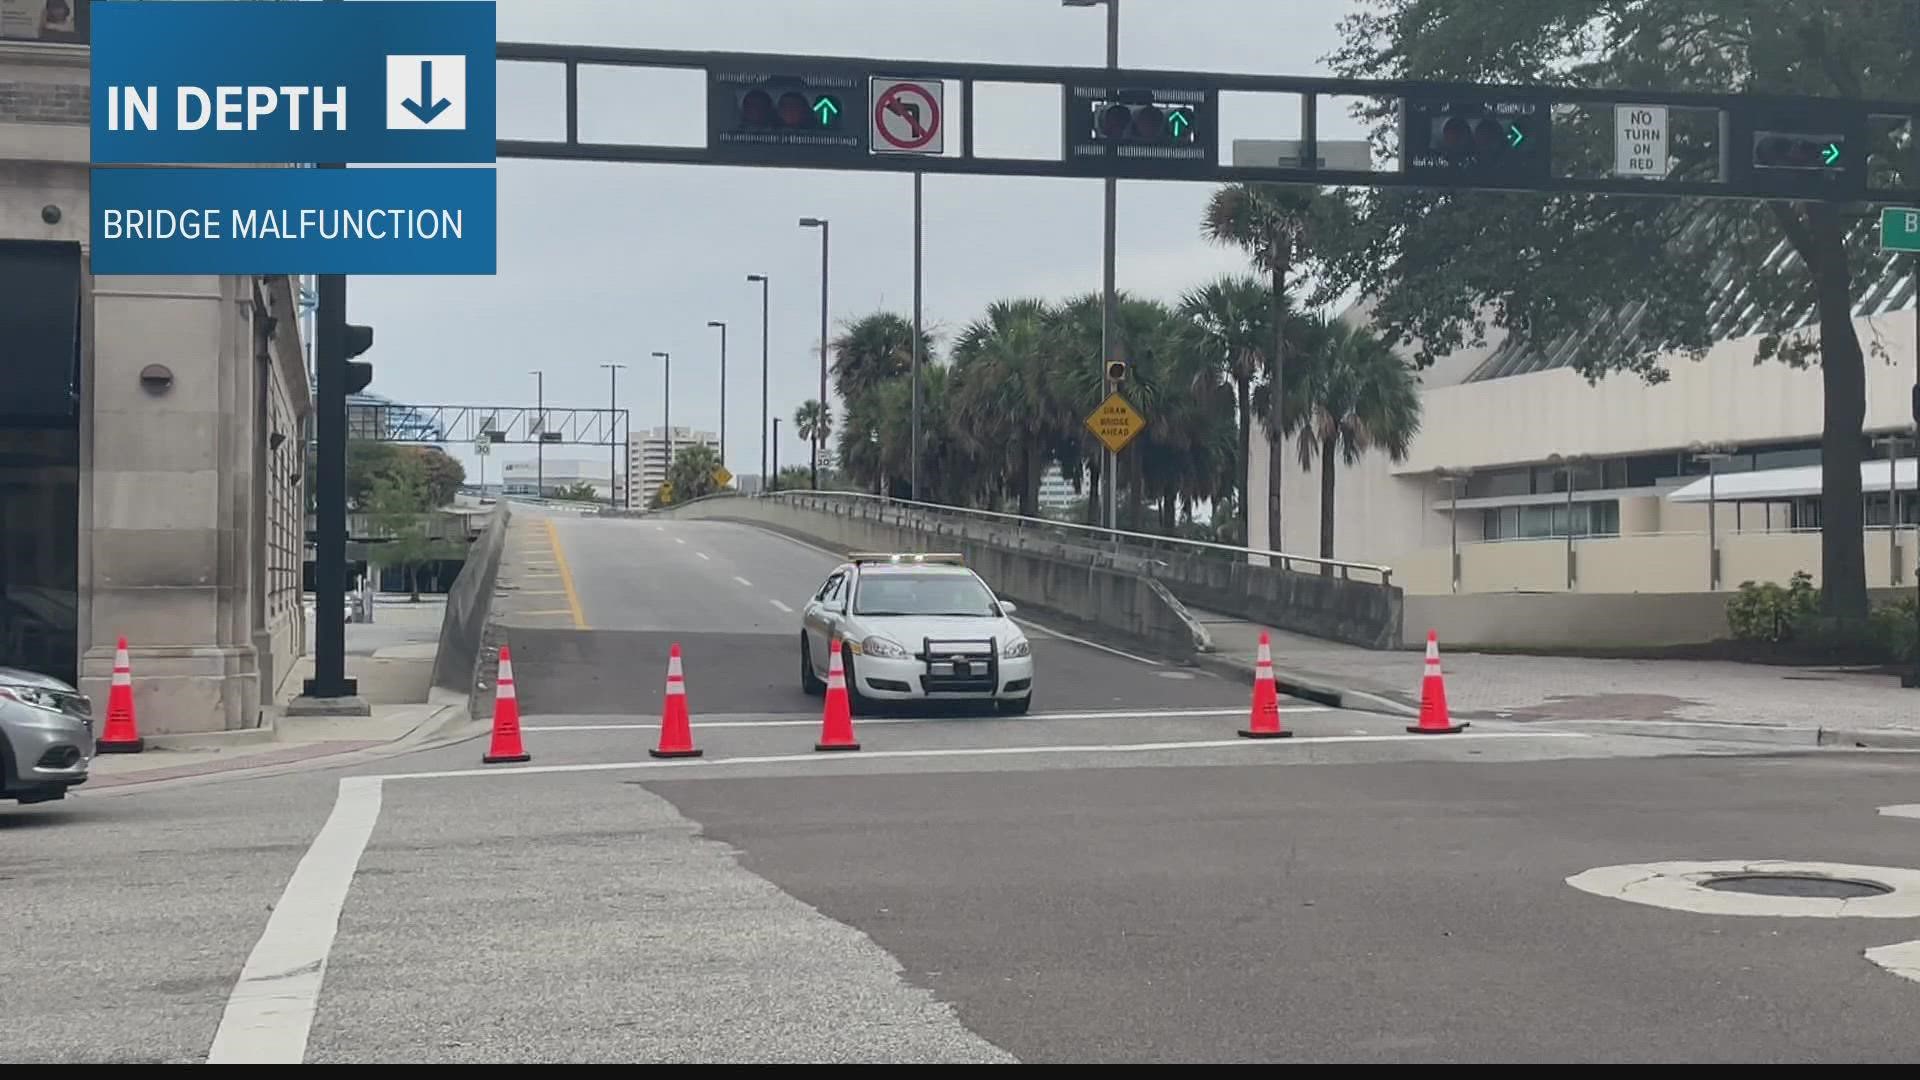 Florida Department of Transportation says crews are working to fix it.